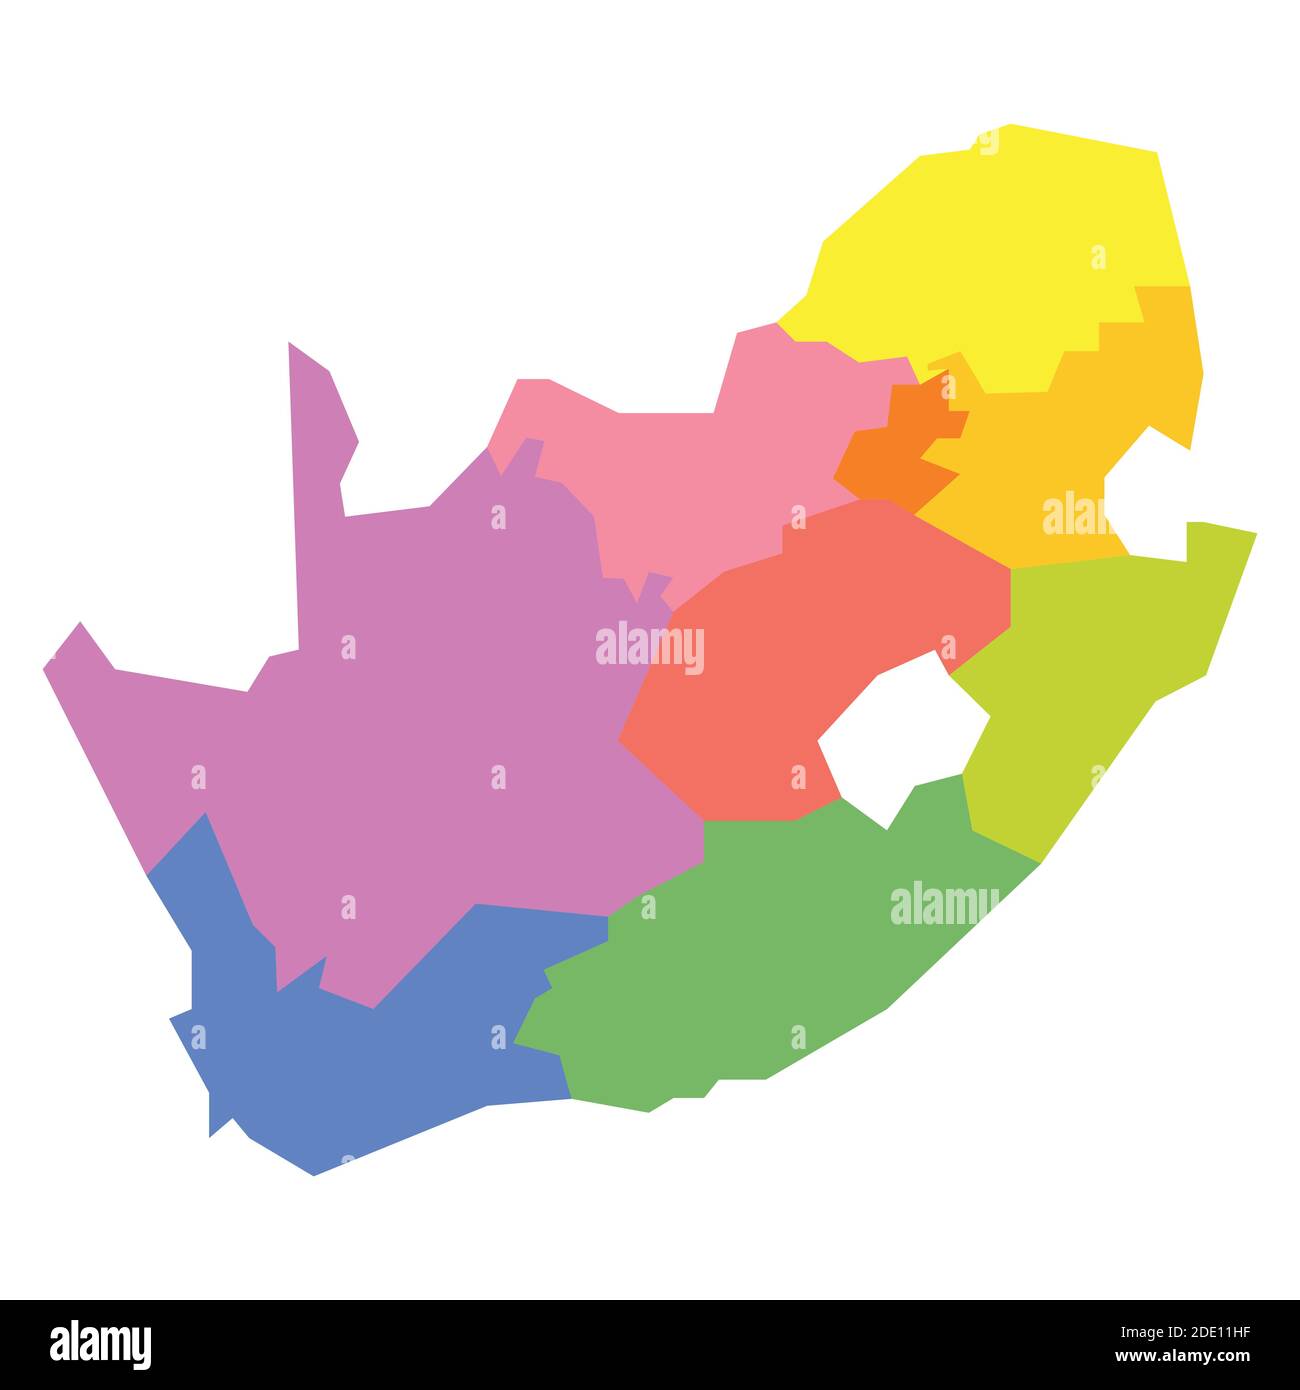 Colorful political map of South Africa, RSA. Administrative divisions - provinces. Simple flat blank vector map Stock Vector